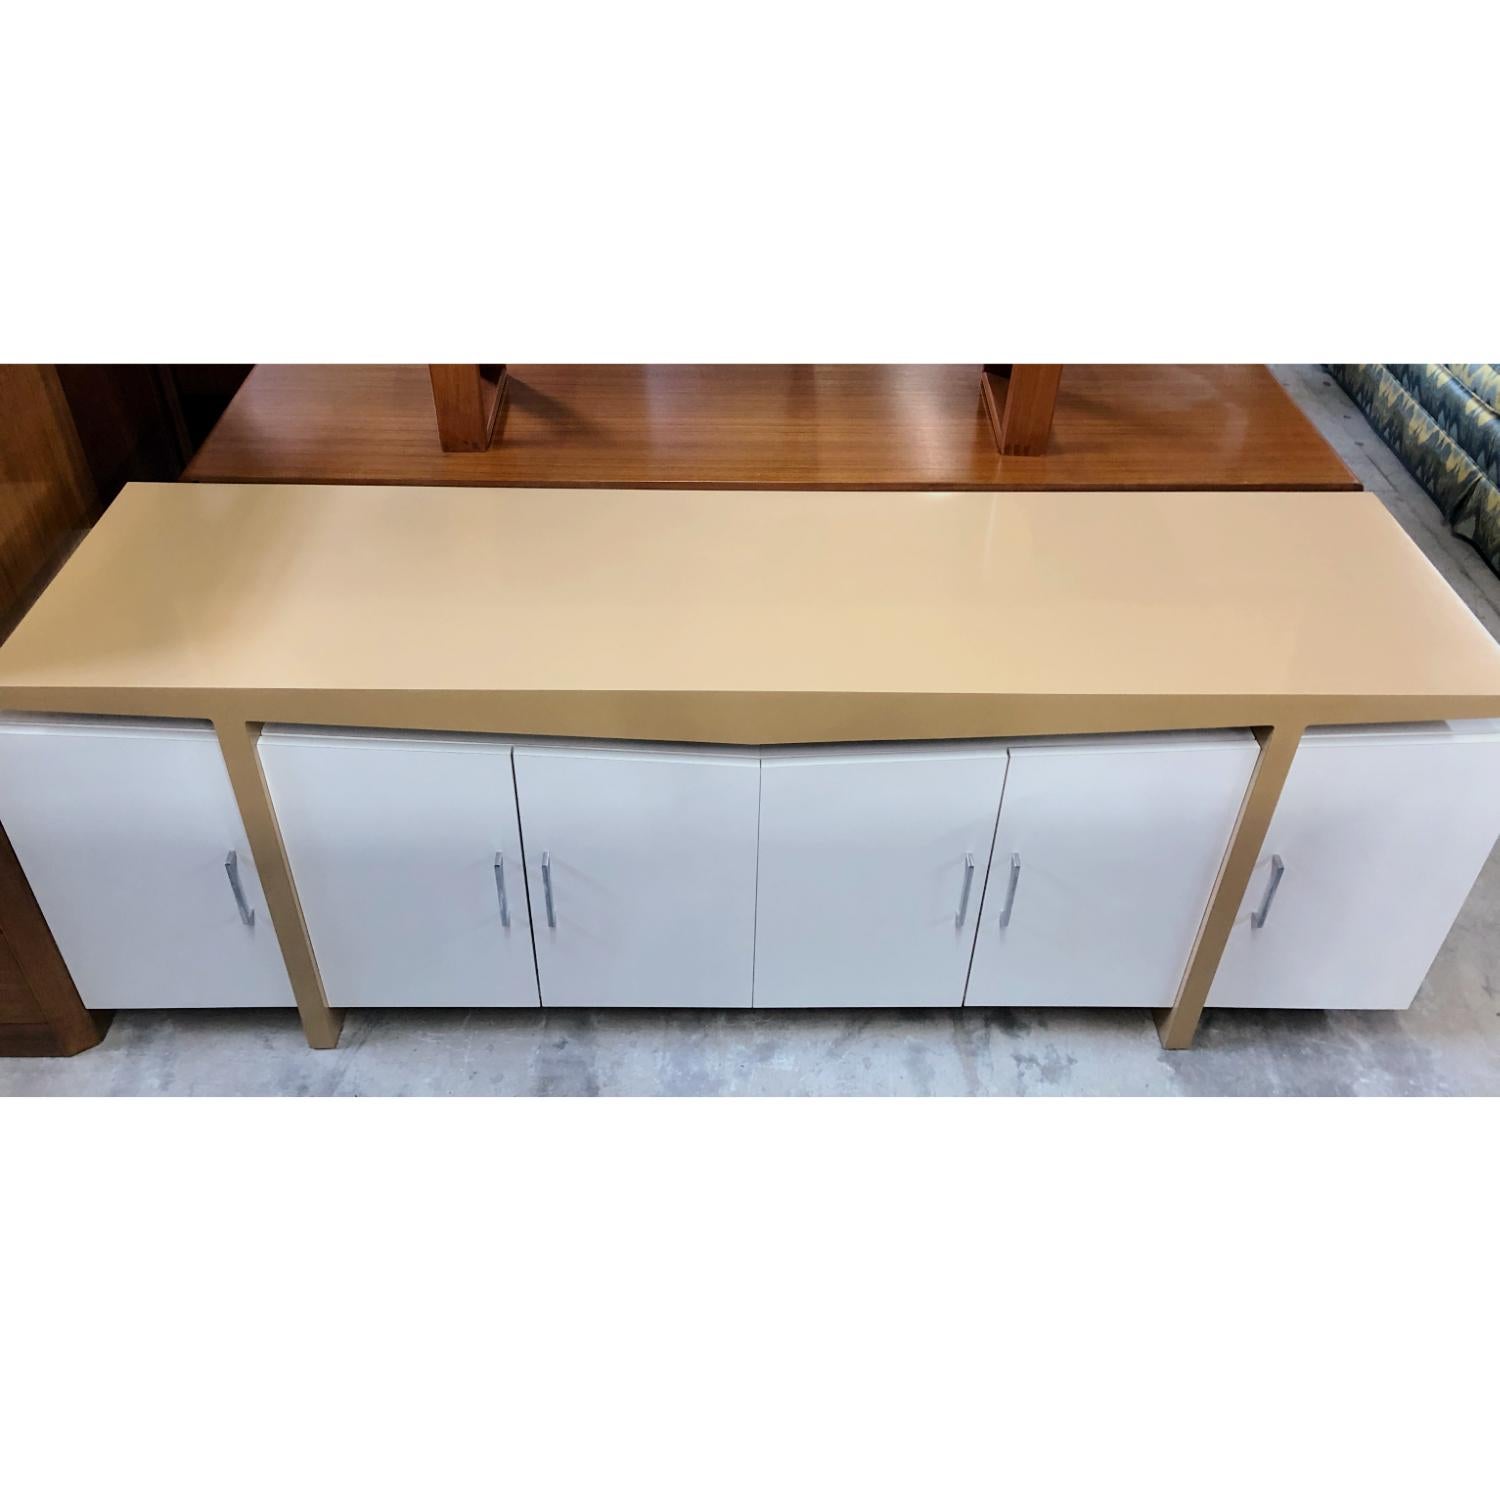 American Deco Inspired Modern White and Beige Credenza TV Stand Buffet